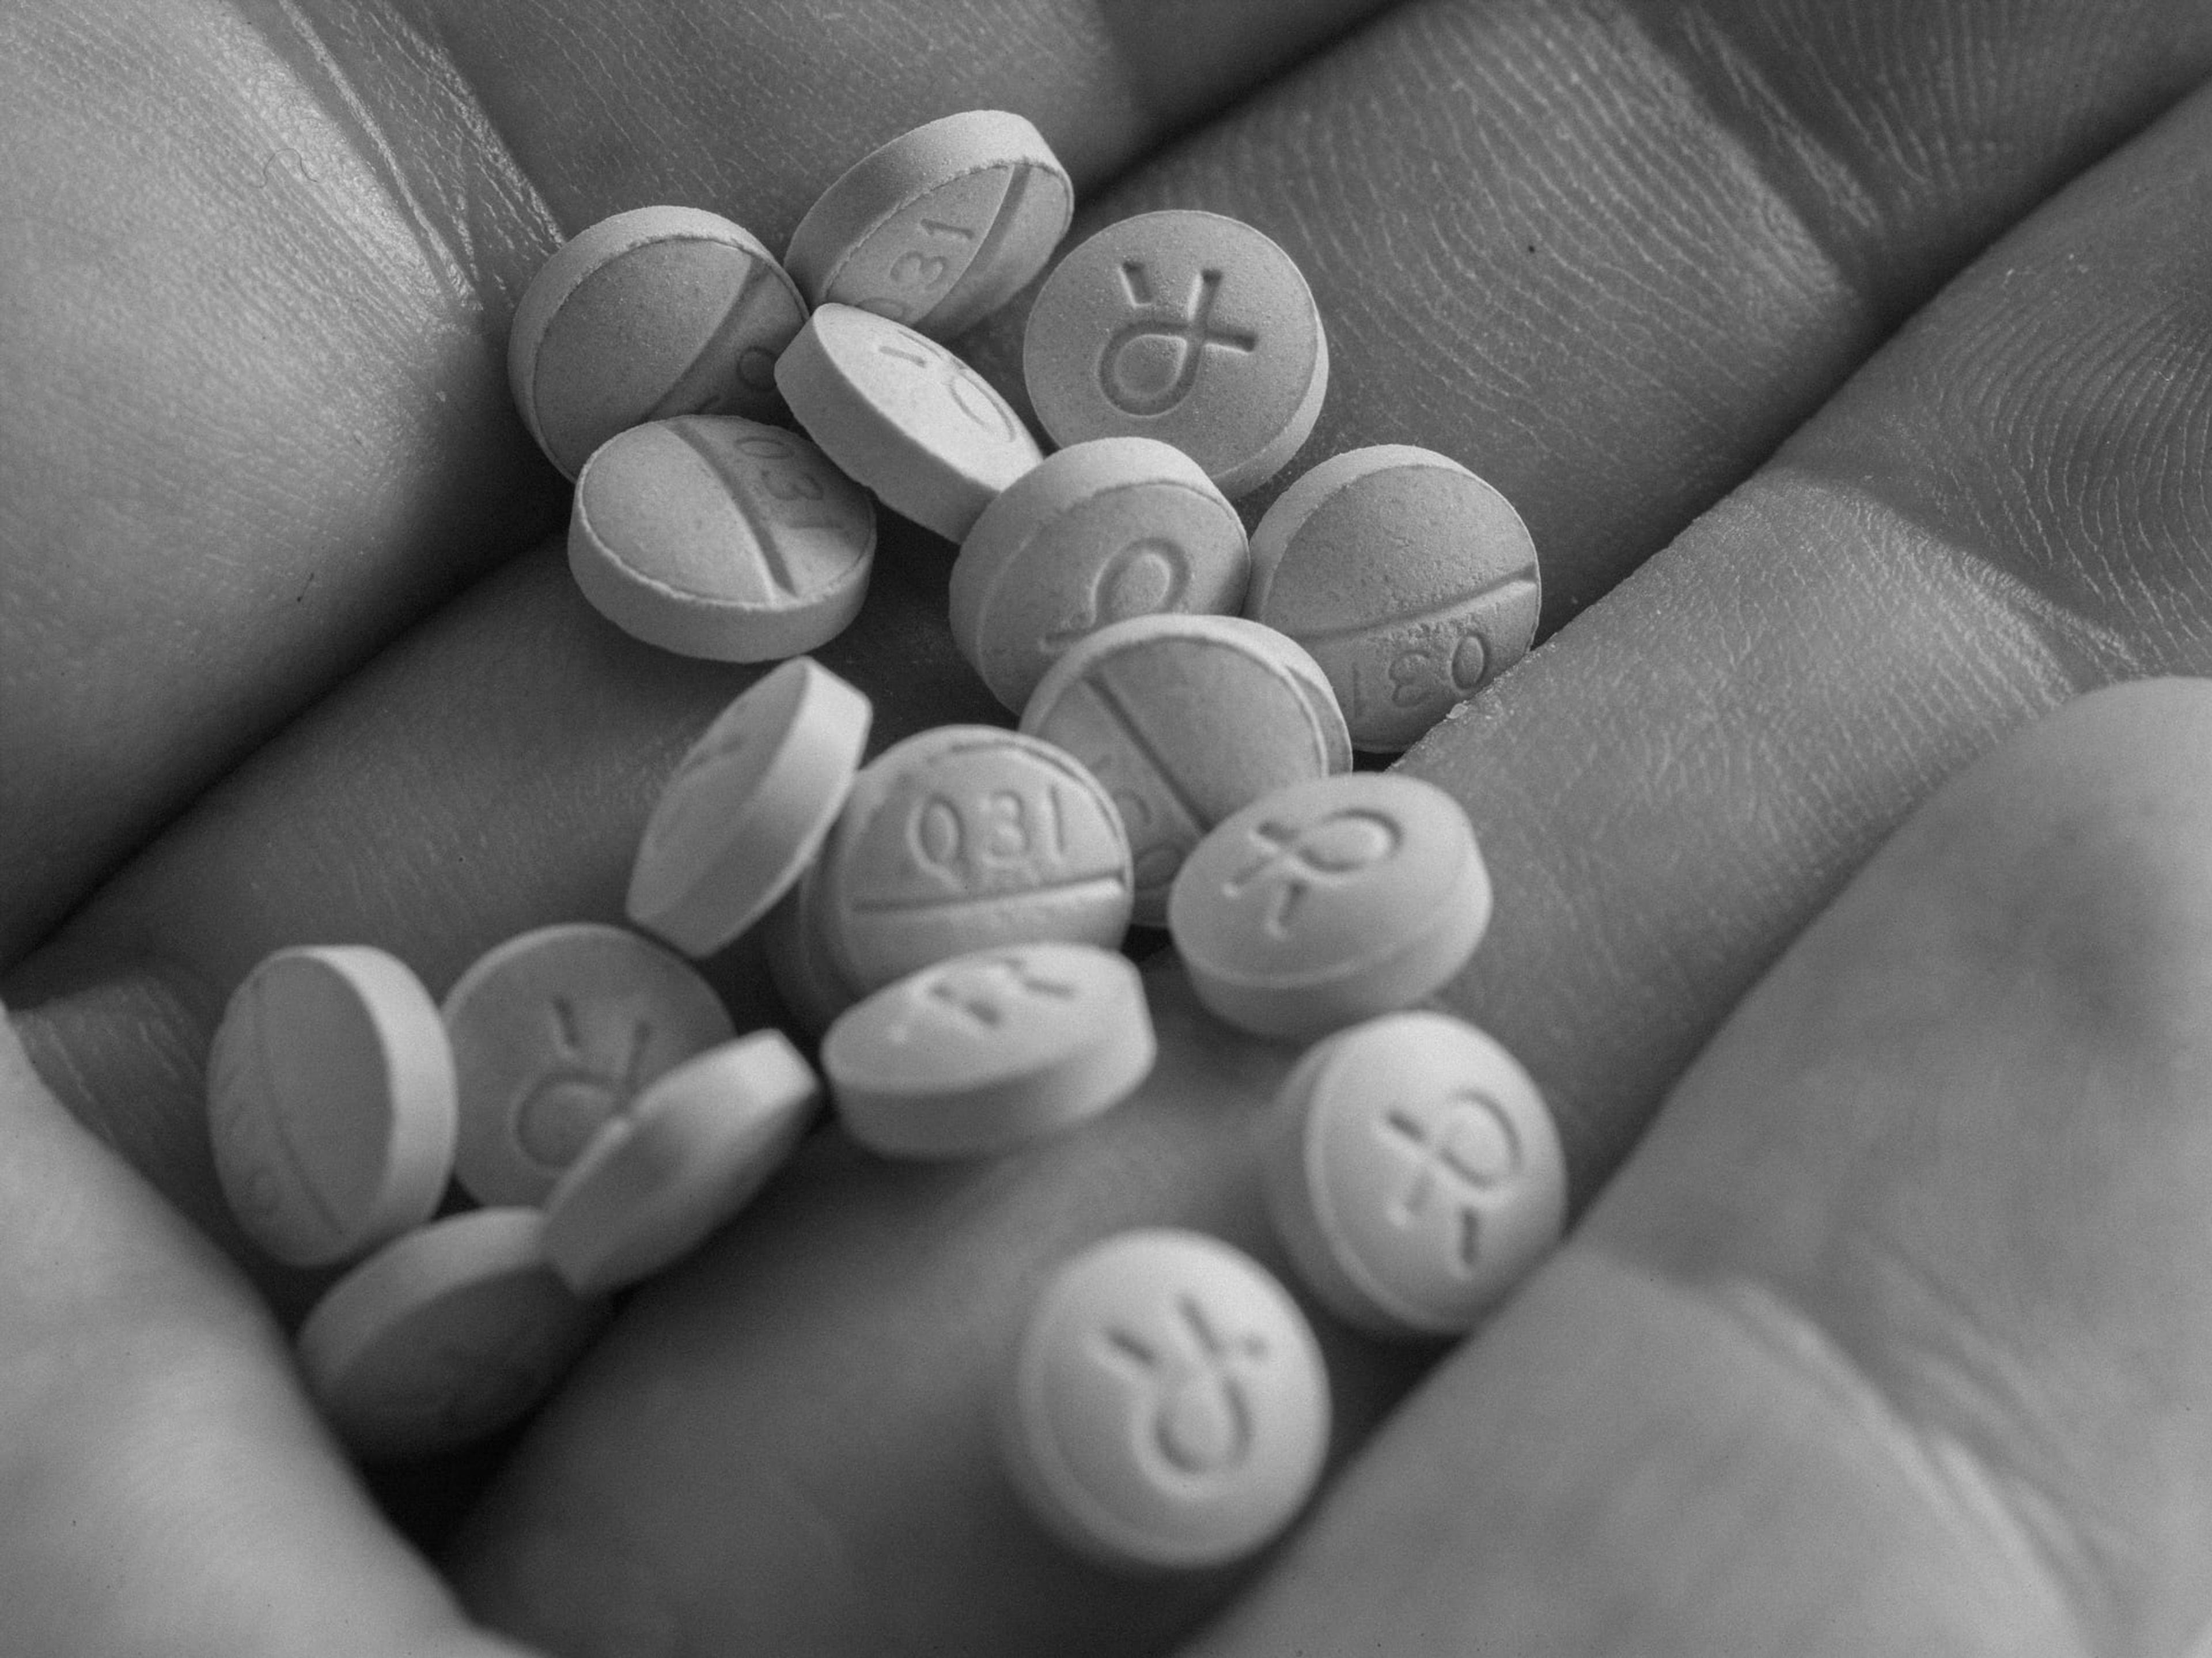 Black and white close-up of a hand holding pills.